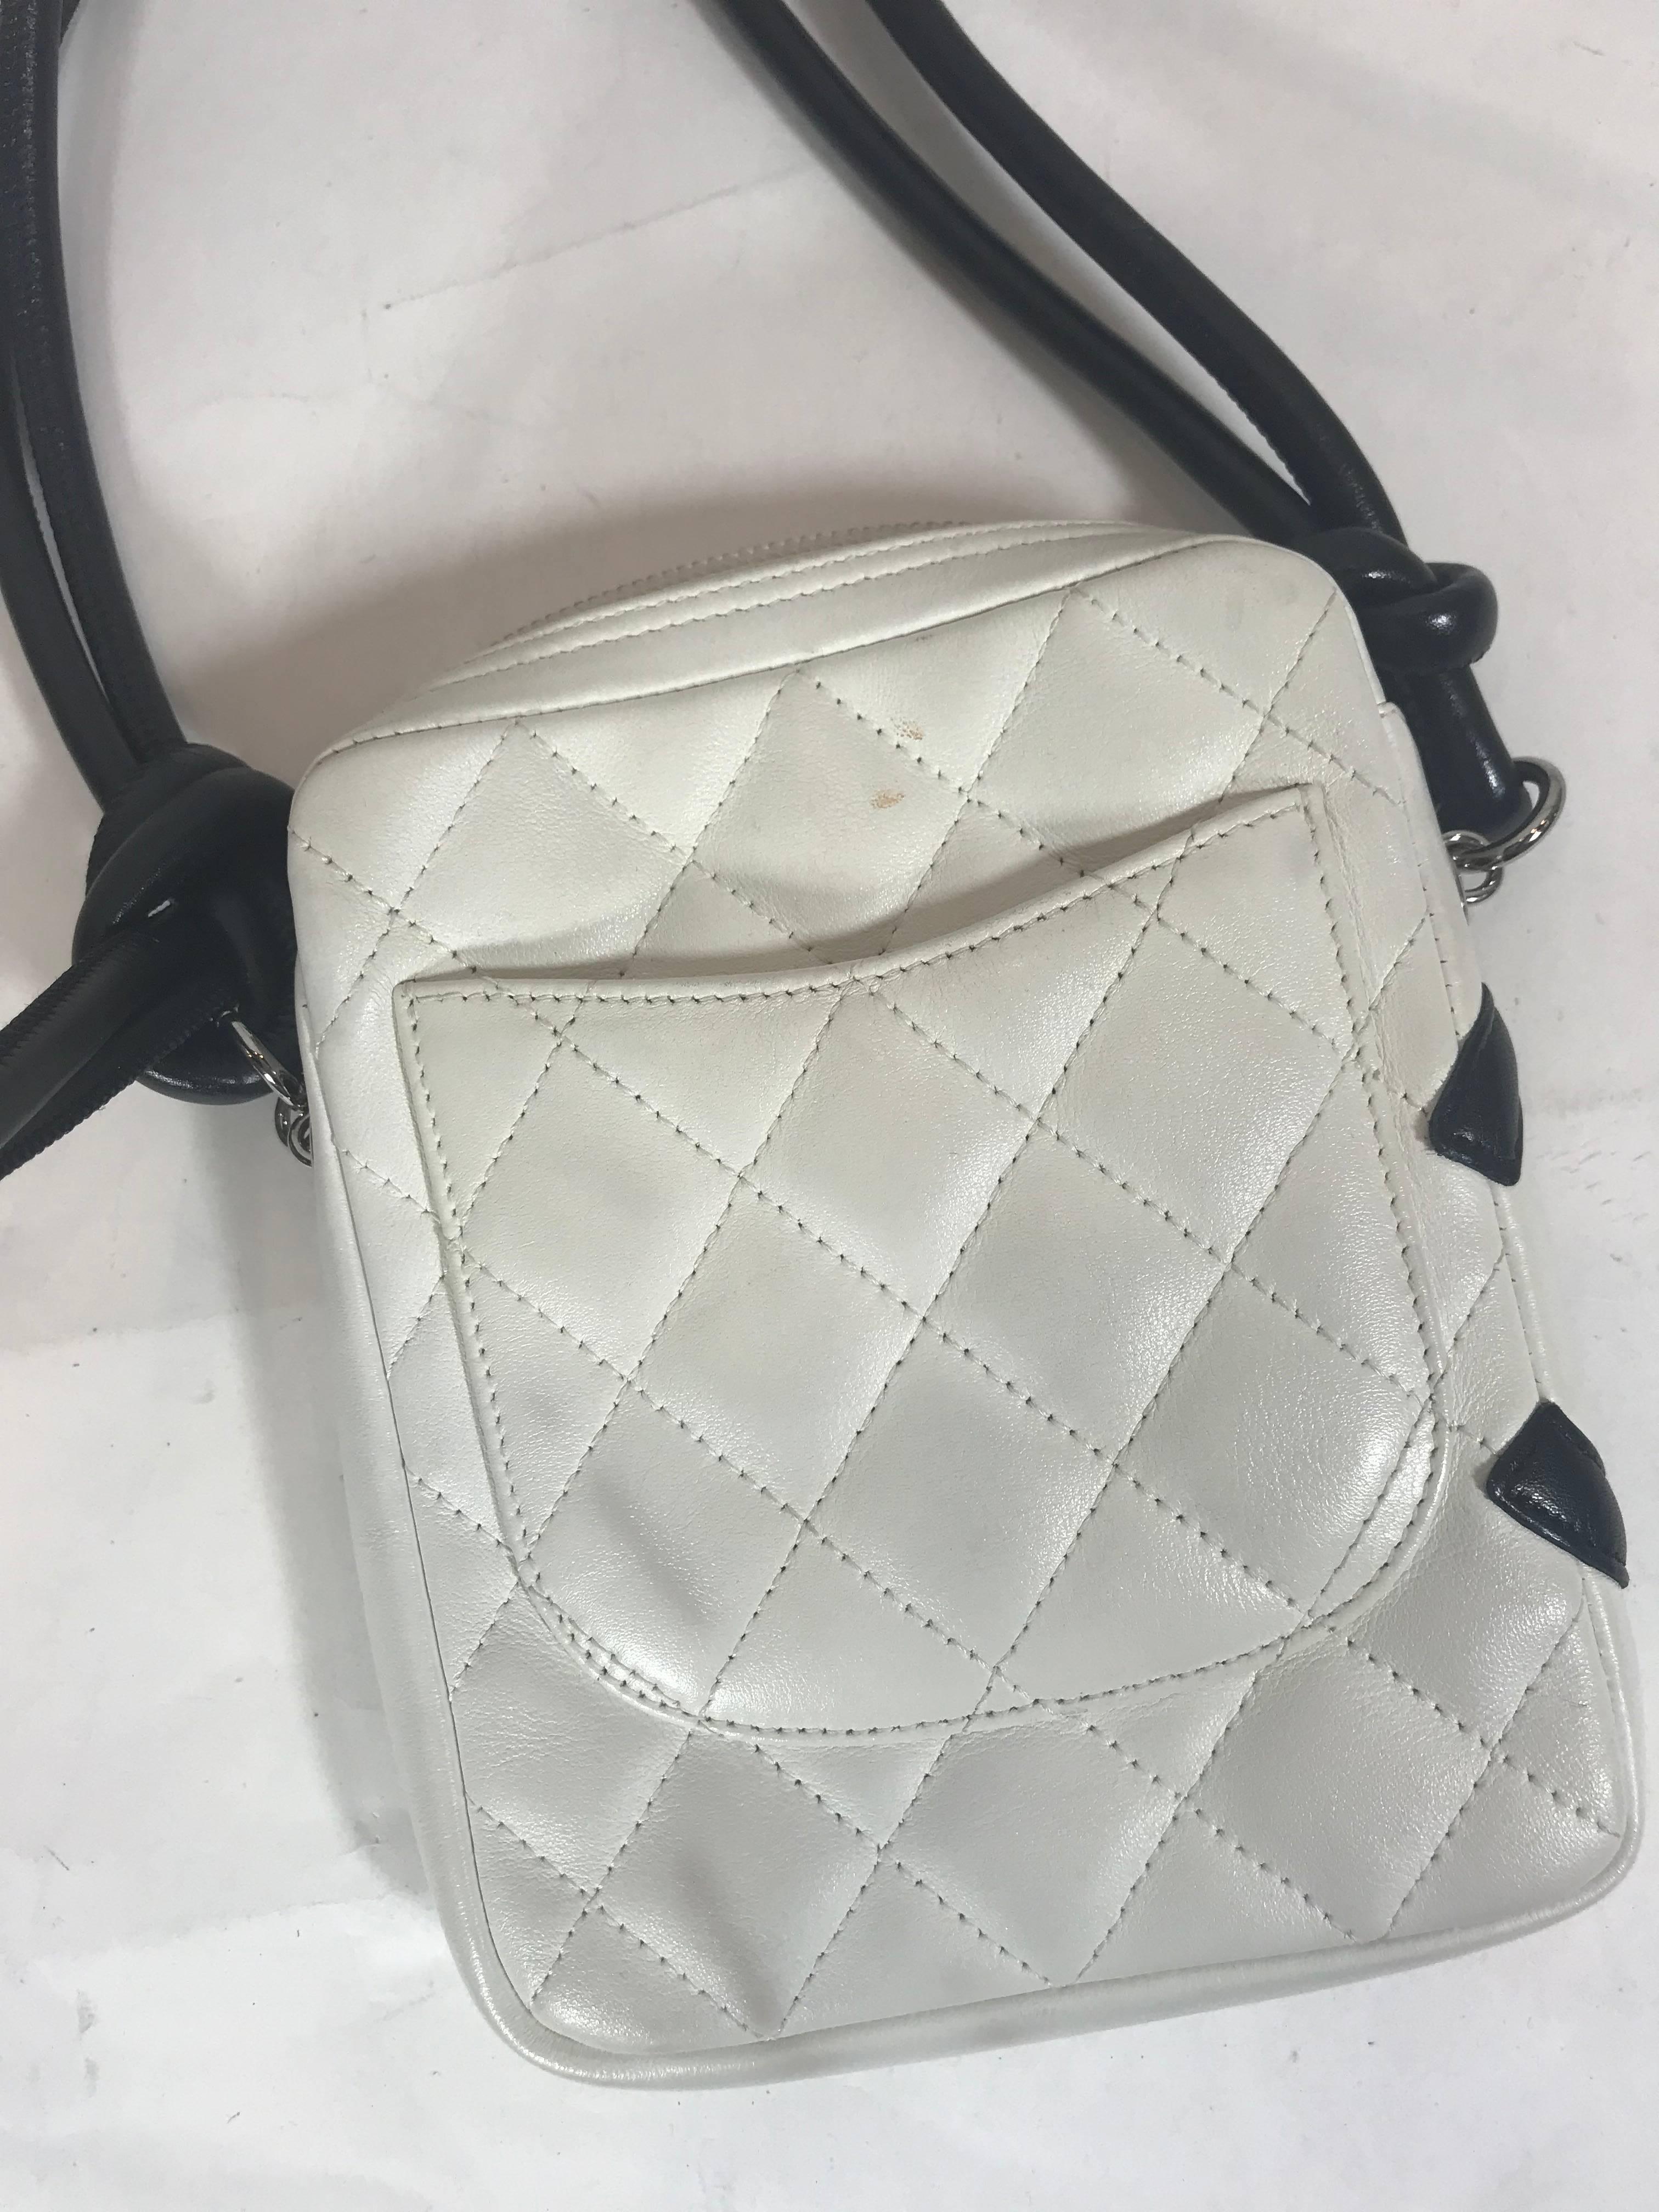 White and black cambon leather.
Silver-tone hardware.
Black crossbody strap.
One exterior opened pocket.
Bright pink interior lining with 